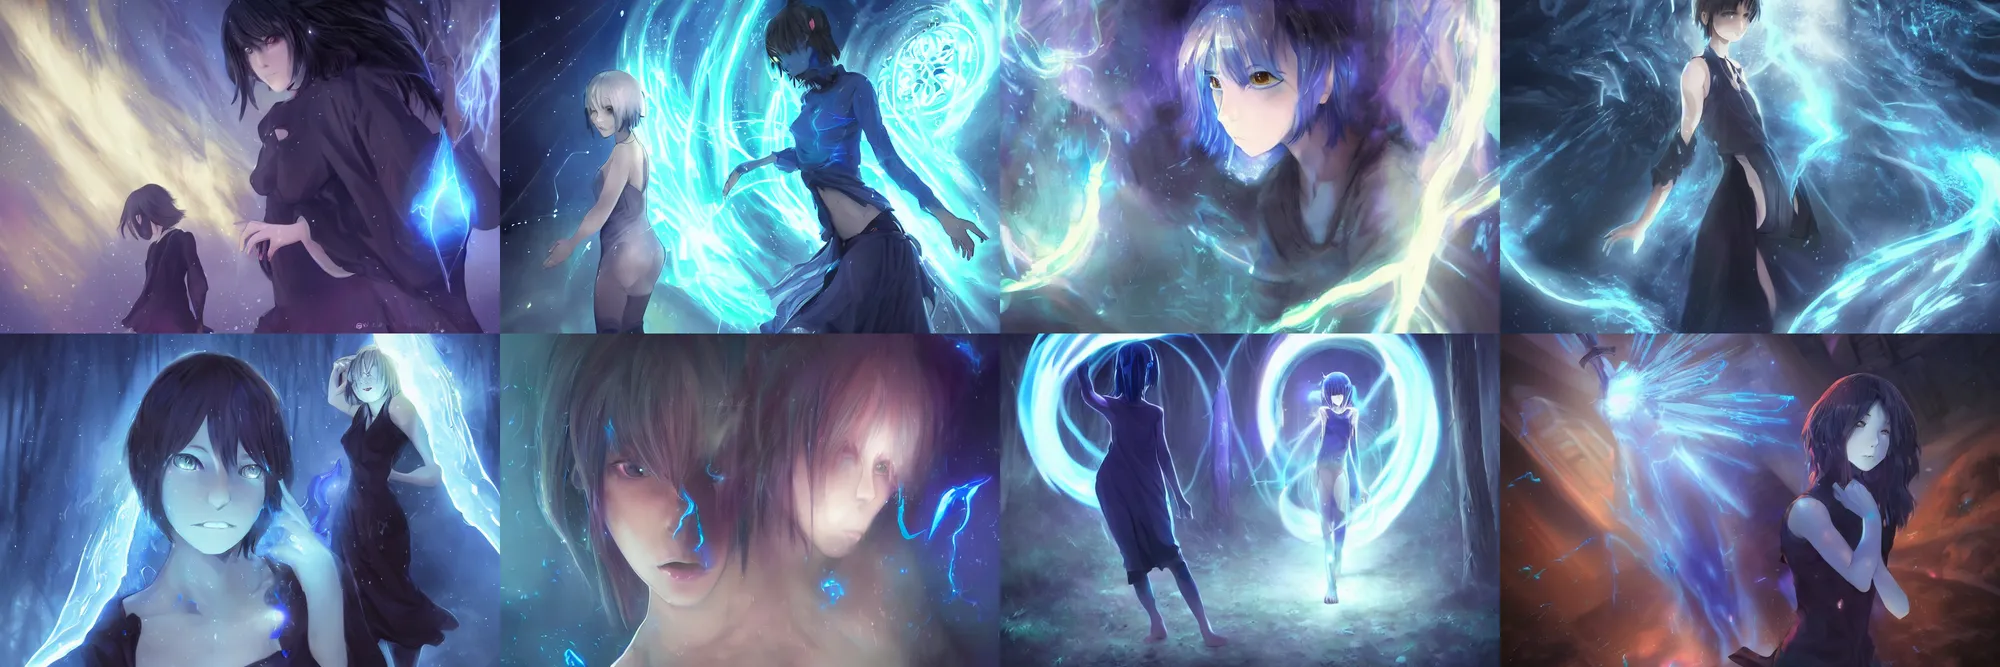 Prompt: girl with a blue mystic light aura, shadowy demons attacking, short dark hair, bobcut, timid, pensive, slender beauty, walking forward, barefoot, keeping away demons, demons in background, crouching and snarling, kept away, blue glowing flowing energy, distant shot, full body shot, anime art by wlop and mobius, fantasy art